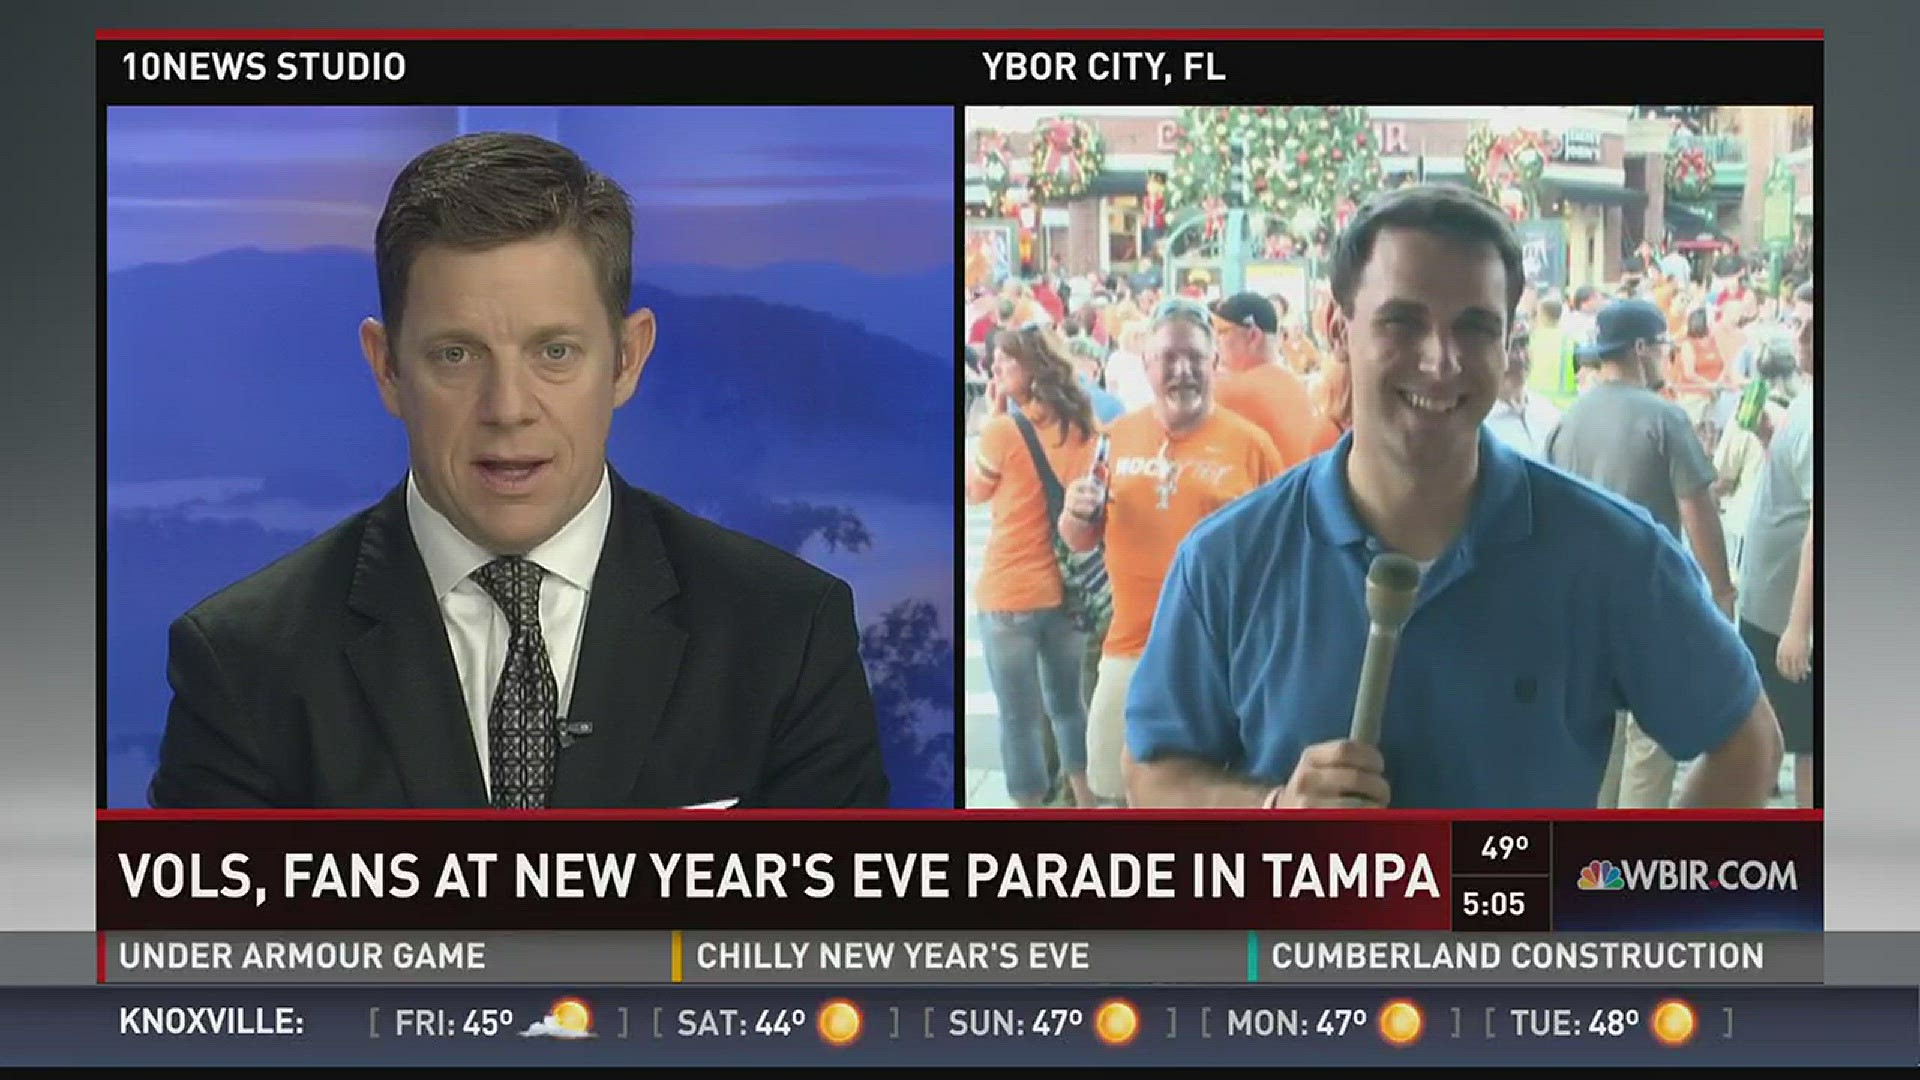 Tennessee fans are celebrating New Year's Eve with a parade and party in Tampa, and looking forward to the Vols appearance in the Outback Bowl on Friday.